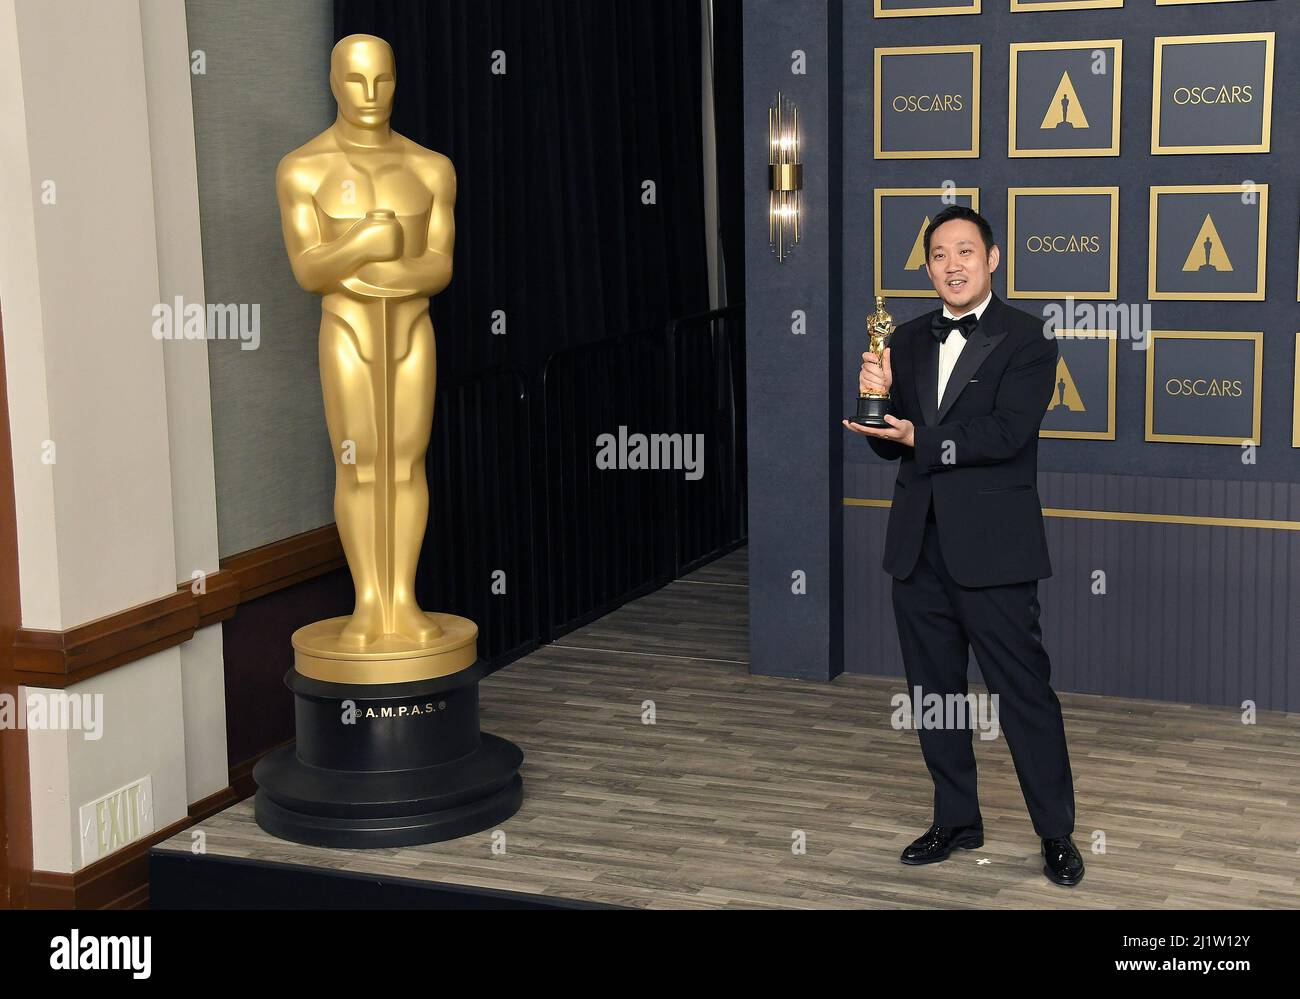 Ryusuke Hamaguchi, winner of the International Feature Film award for ‘Drive My Car’ posing on stage in the press room at the 94th Academy Awards held at the Dolby Theatre in Hollywood, CA on Sundayday, ?March 27, 2022. (Photo By Sthanlee B. Mirador/Sipa USA) Stock Photo